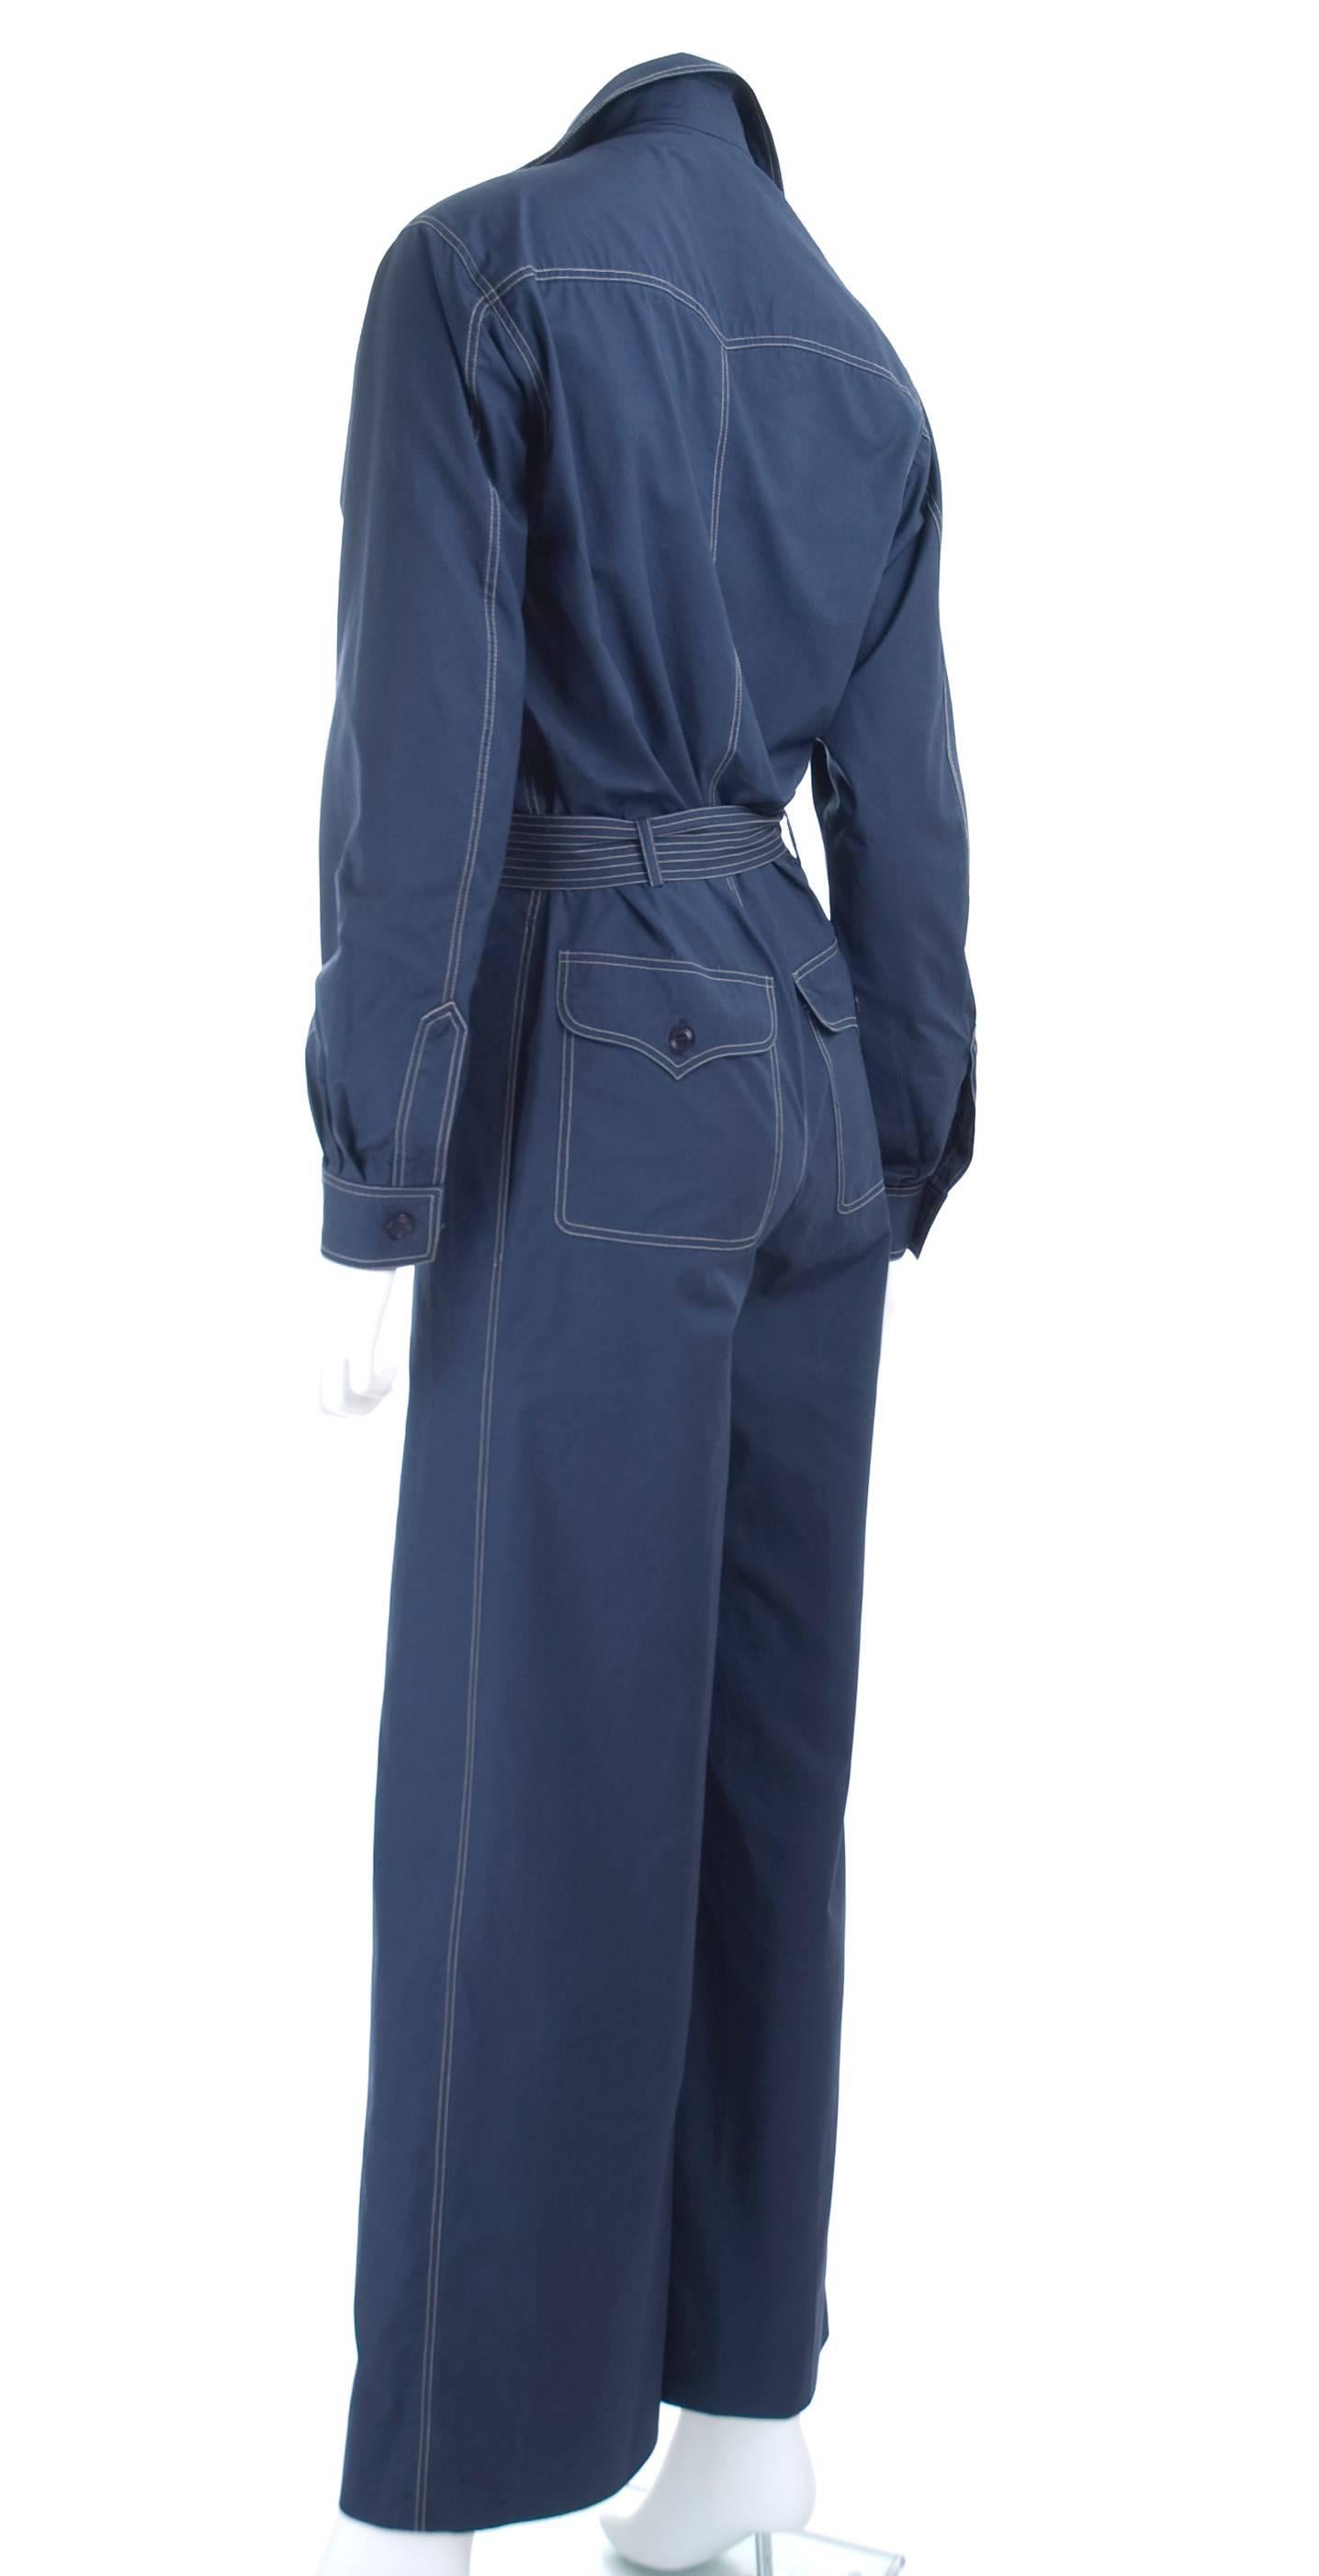 RARE Vintage 1970 Yves Saint Laurent Jumpsuit Navy with Contrast Stitching For Sale 2